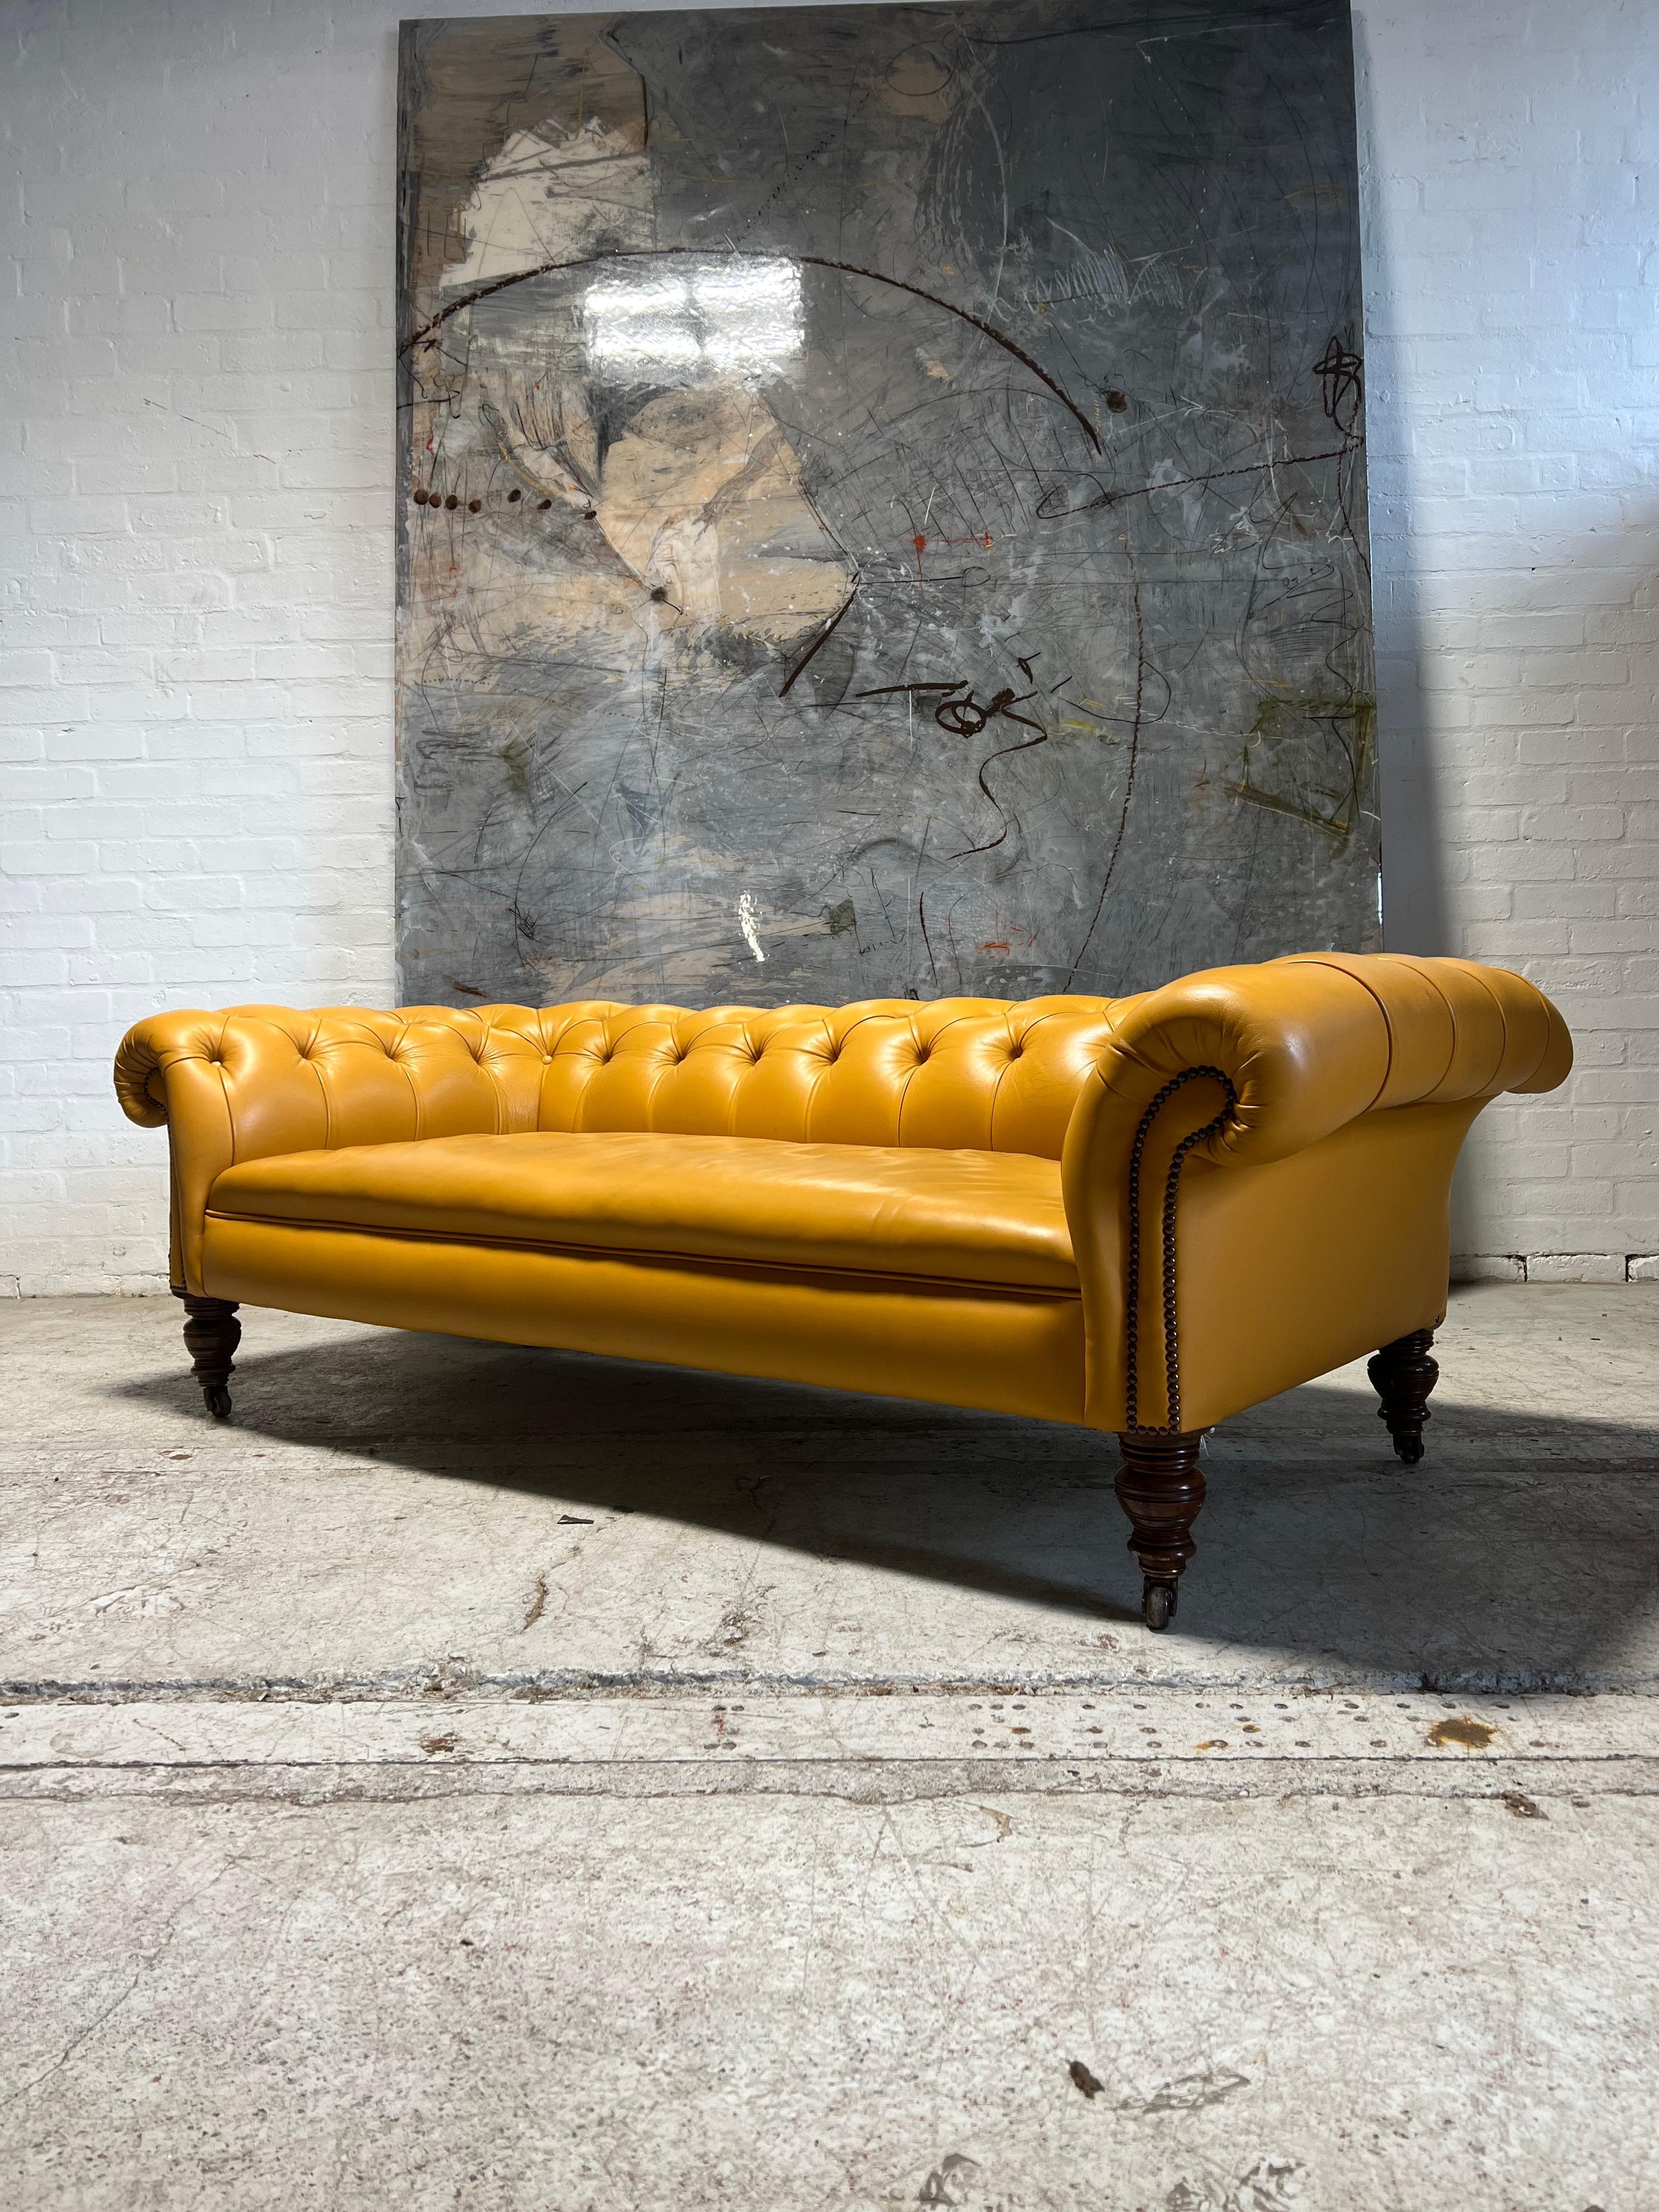 British Antique 19thC Chesterfield Sofa in Stunning Sunflower Yellow Leather For Sale